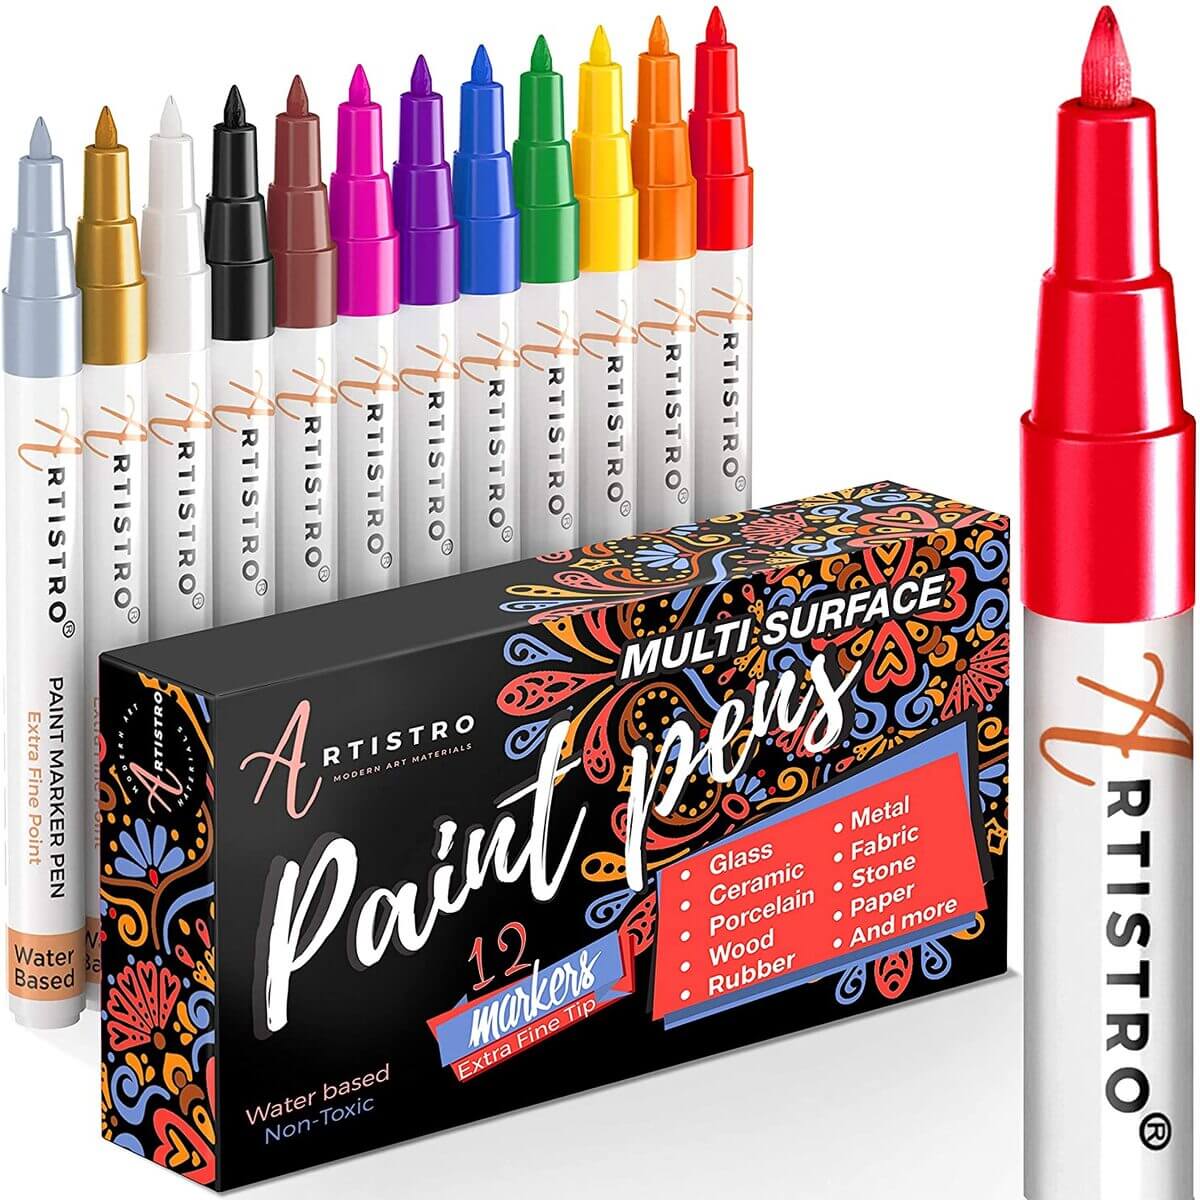  ARTISTRO Paint Pens for Rock Painting, Stone, Ceramic